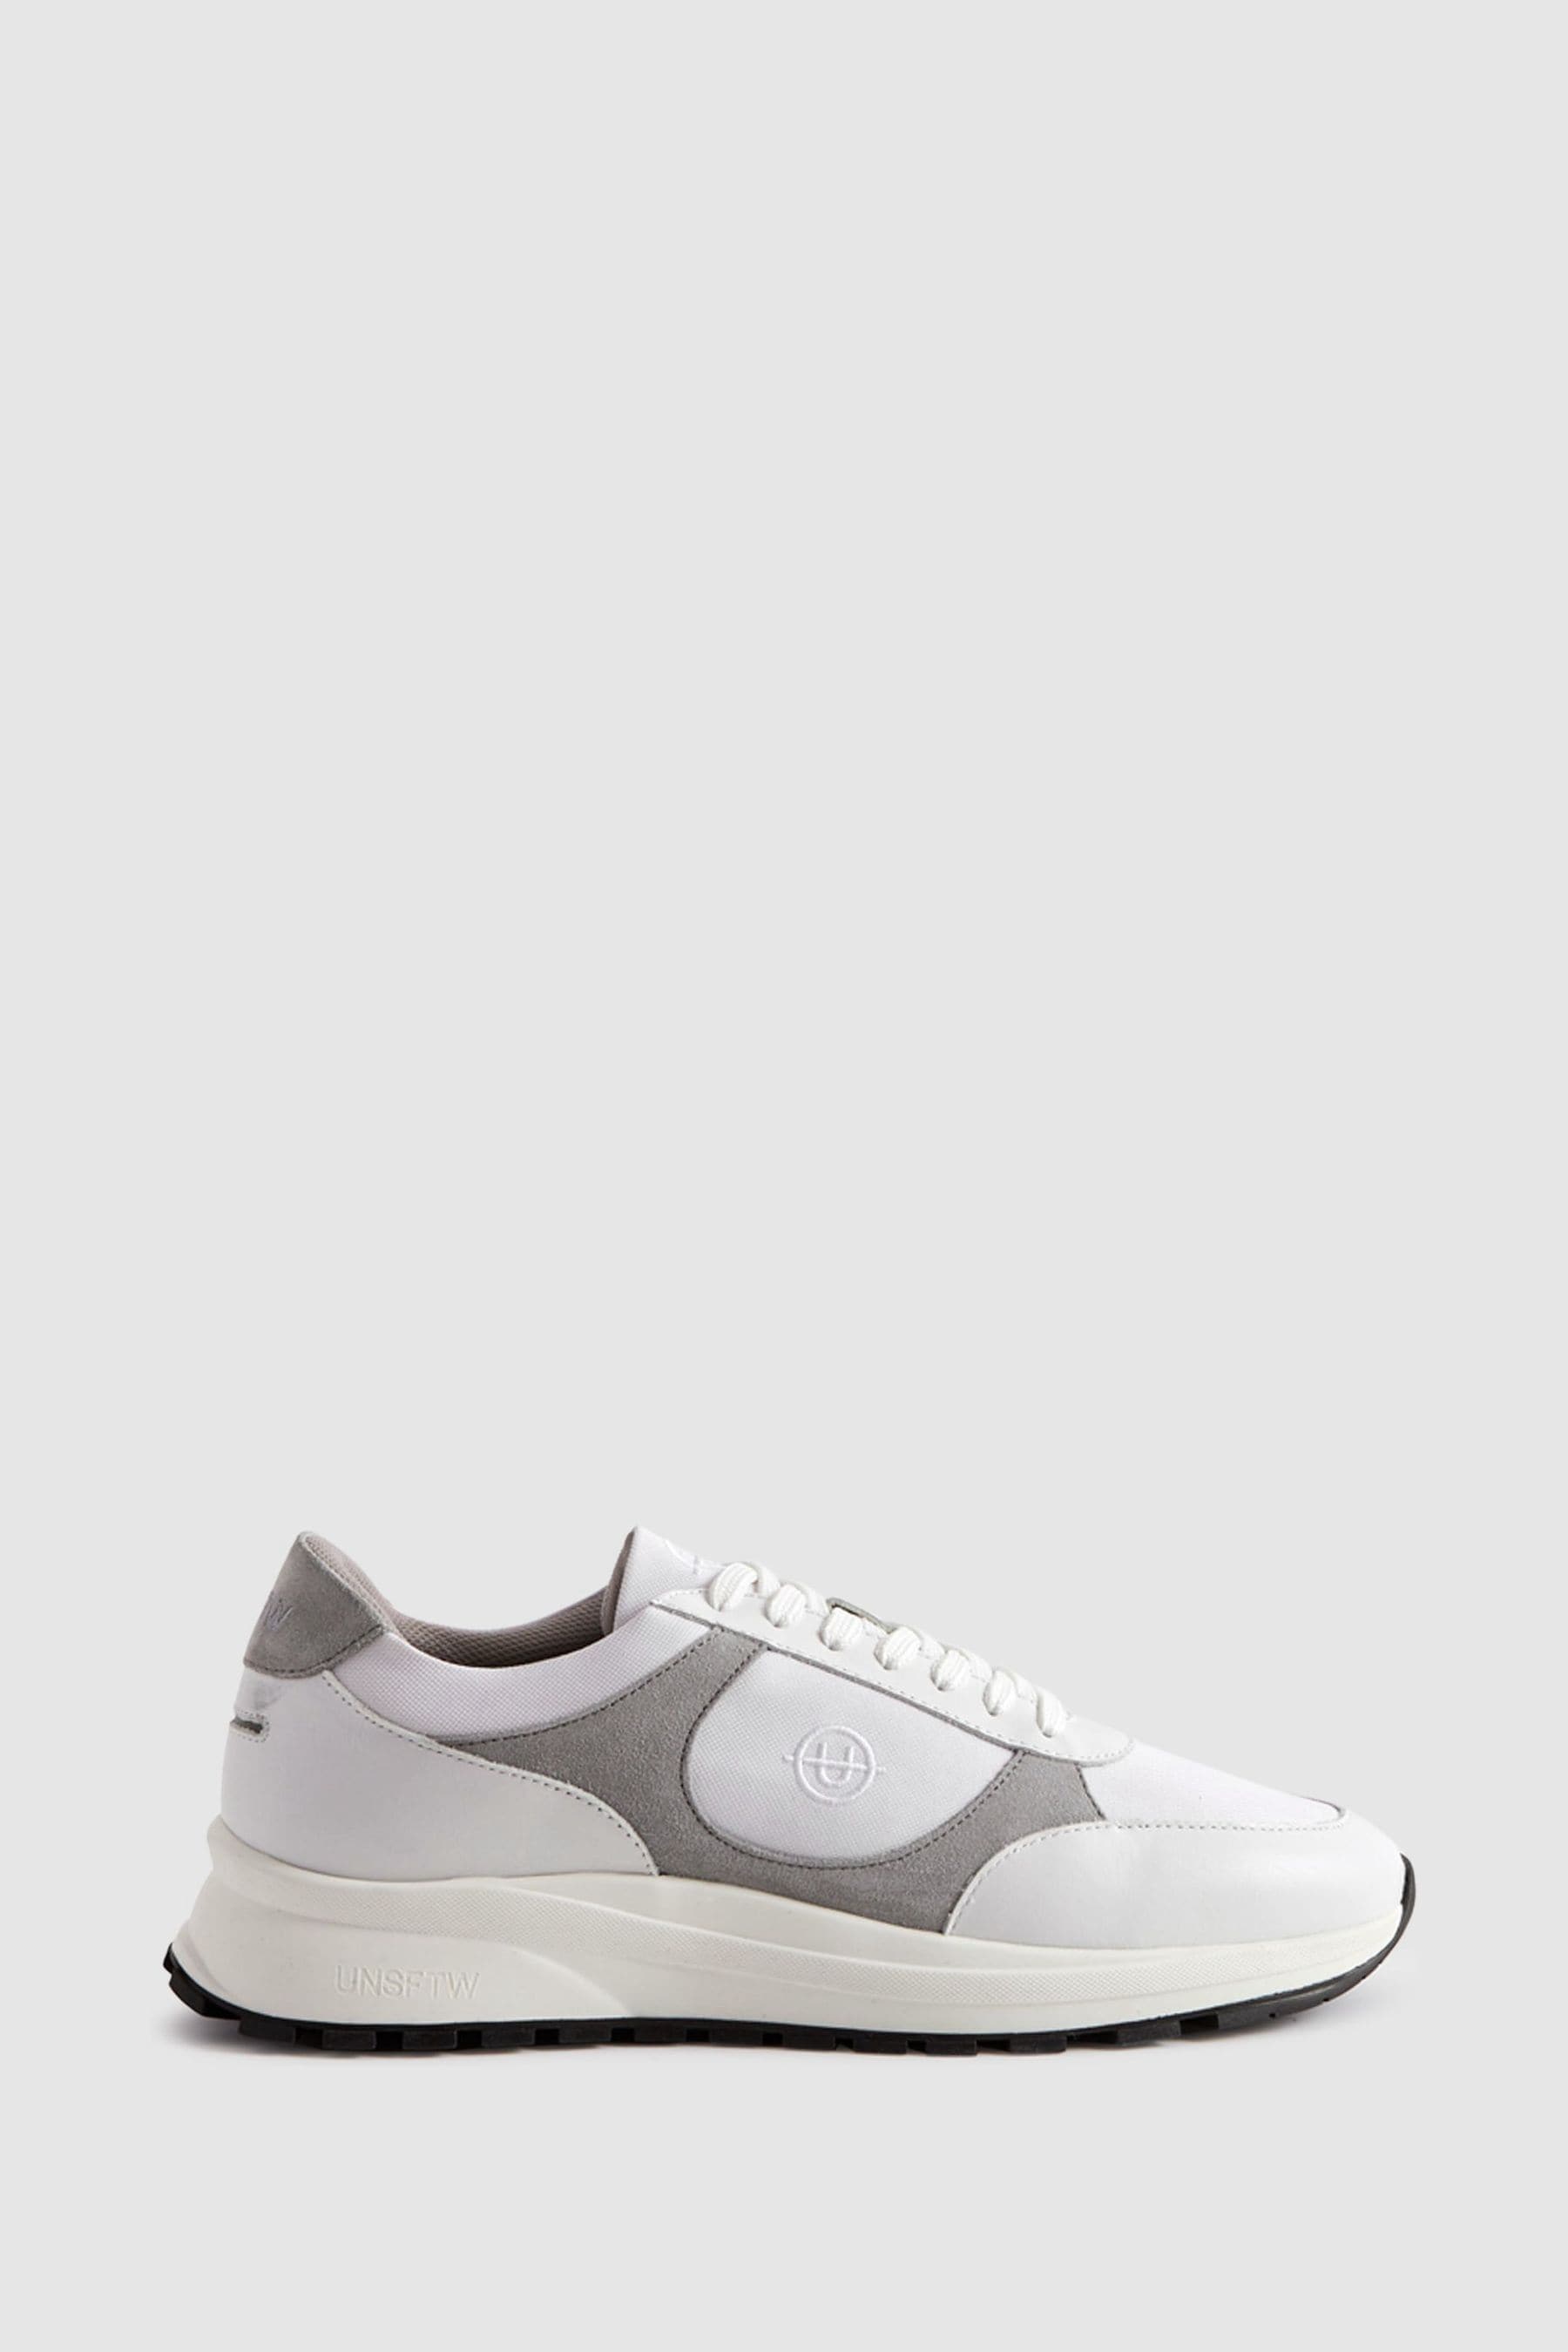 Unseen Plemont Trainers In Grey/white